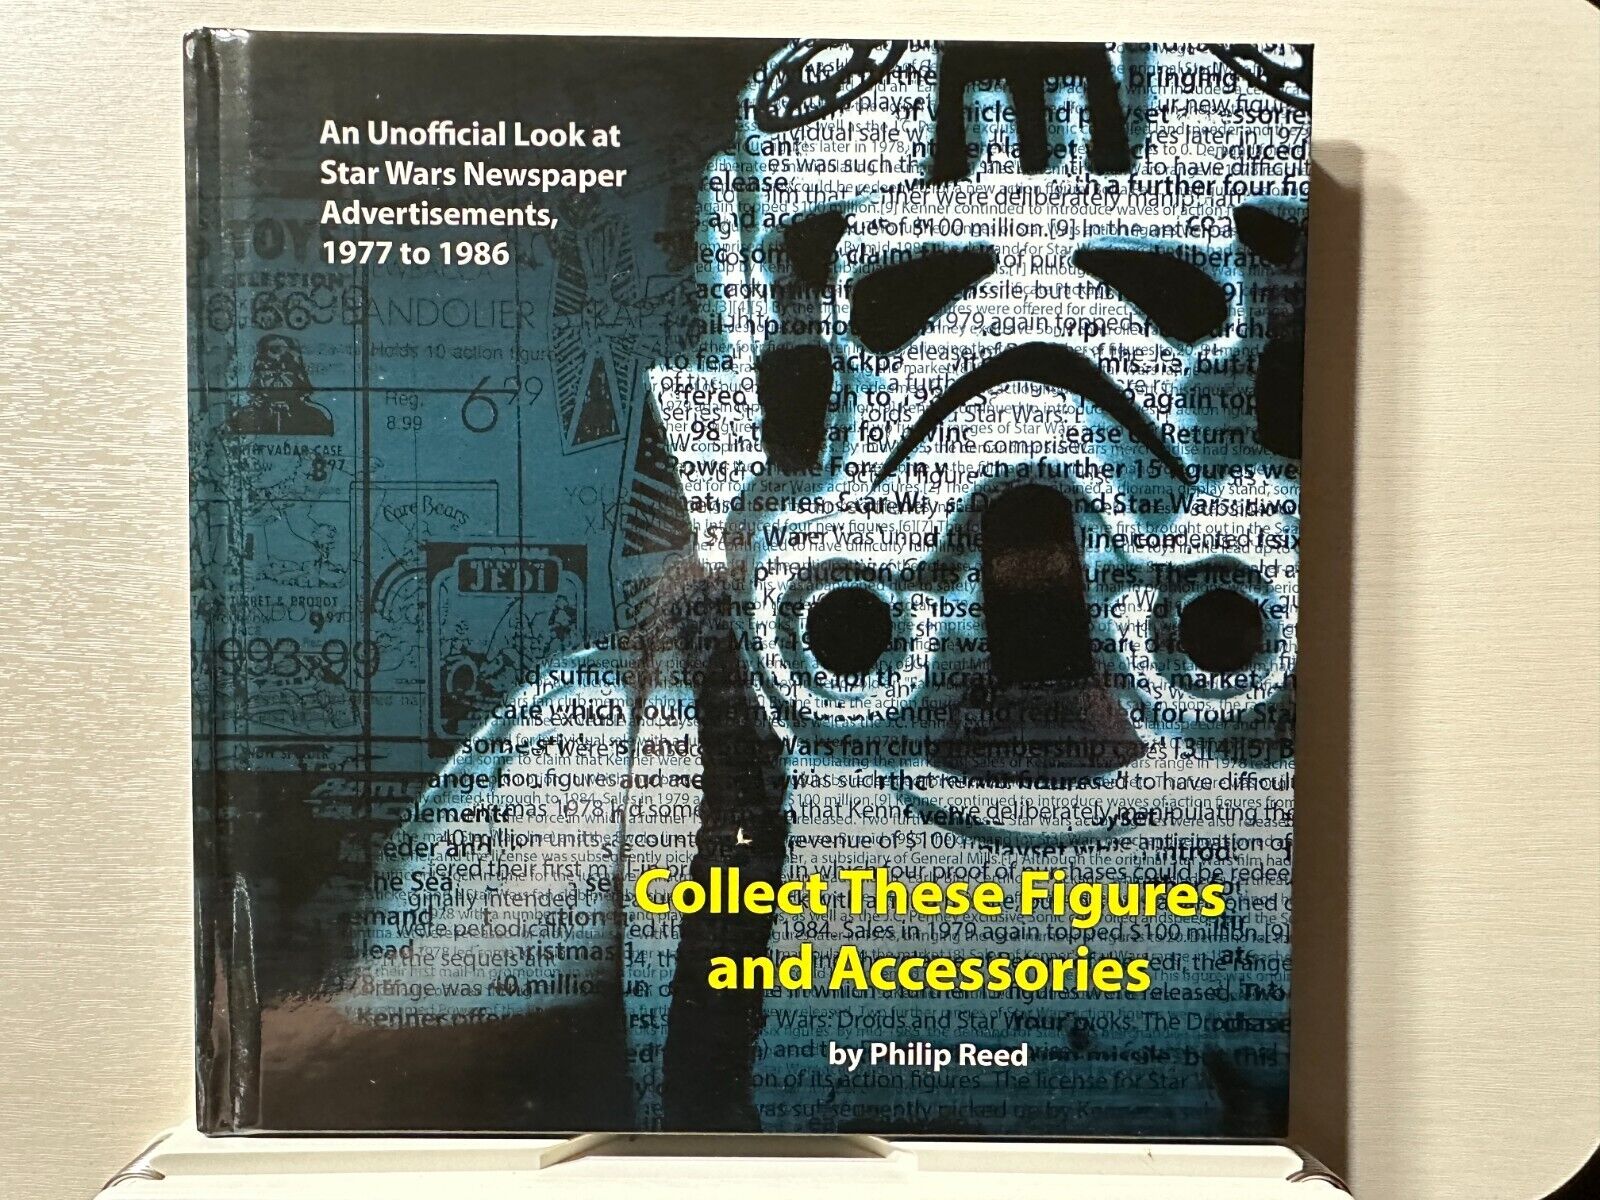 Kenner Star Wars Book - Collect These Figures And Accessories by Philip Reed